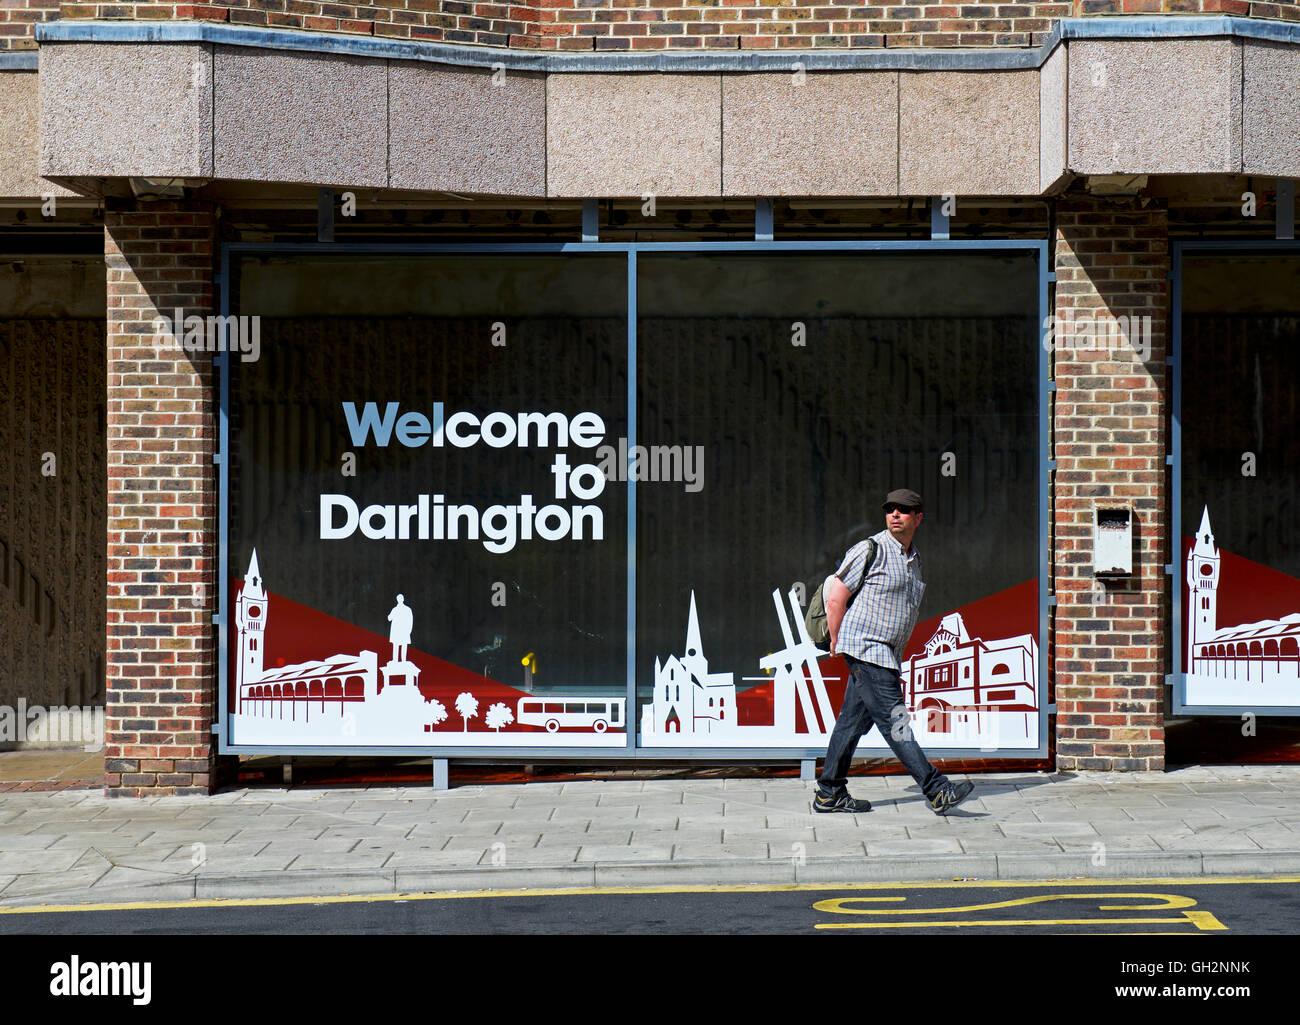 Man walking past sign - Welcome to Darlington - County Durham, England UK Stock Photo